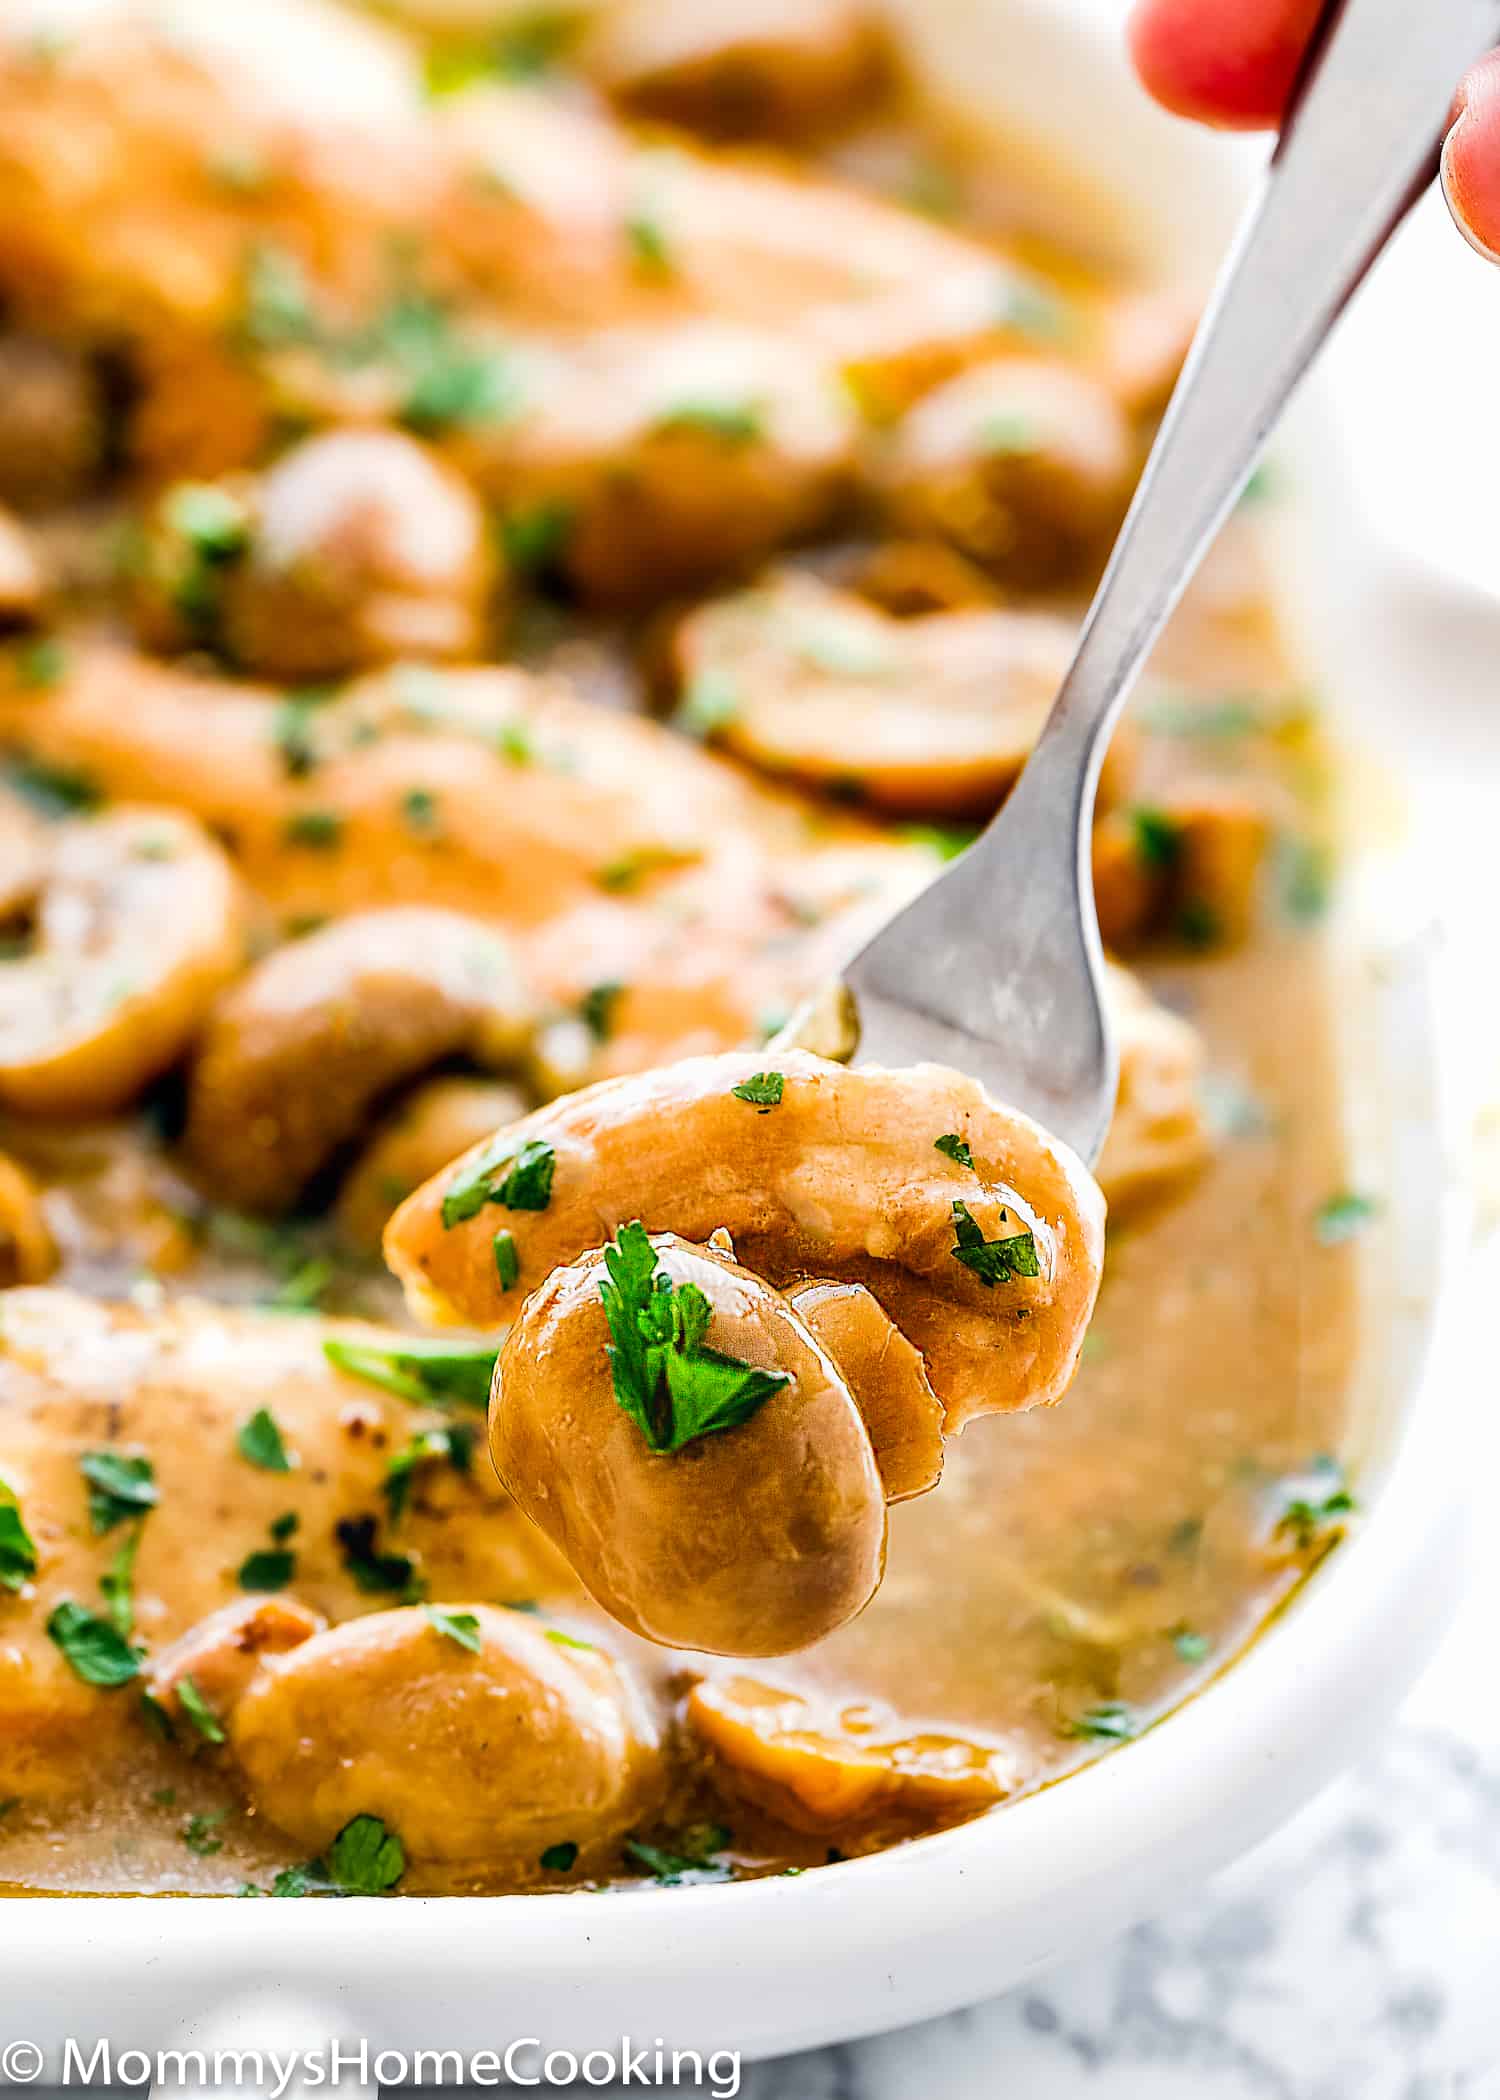 This Easy Instant Pot Chicken Madeira recipe always gets rave reviews at the dinner table!  Easy to make on busy weeknights but yet fancy to serve guests. I am sure it will become a new favorite for your family. https://mommyshomecooking.com